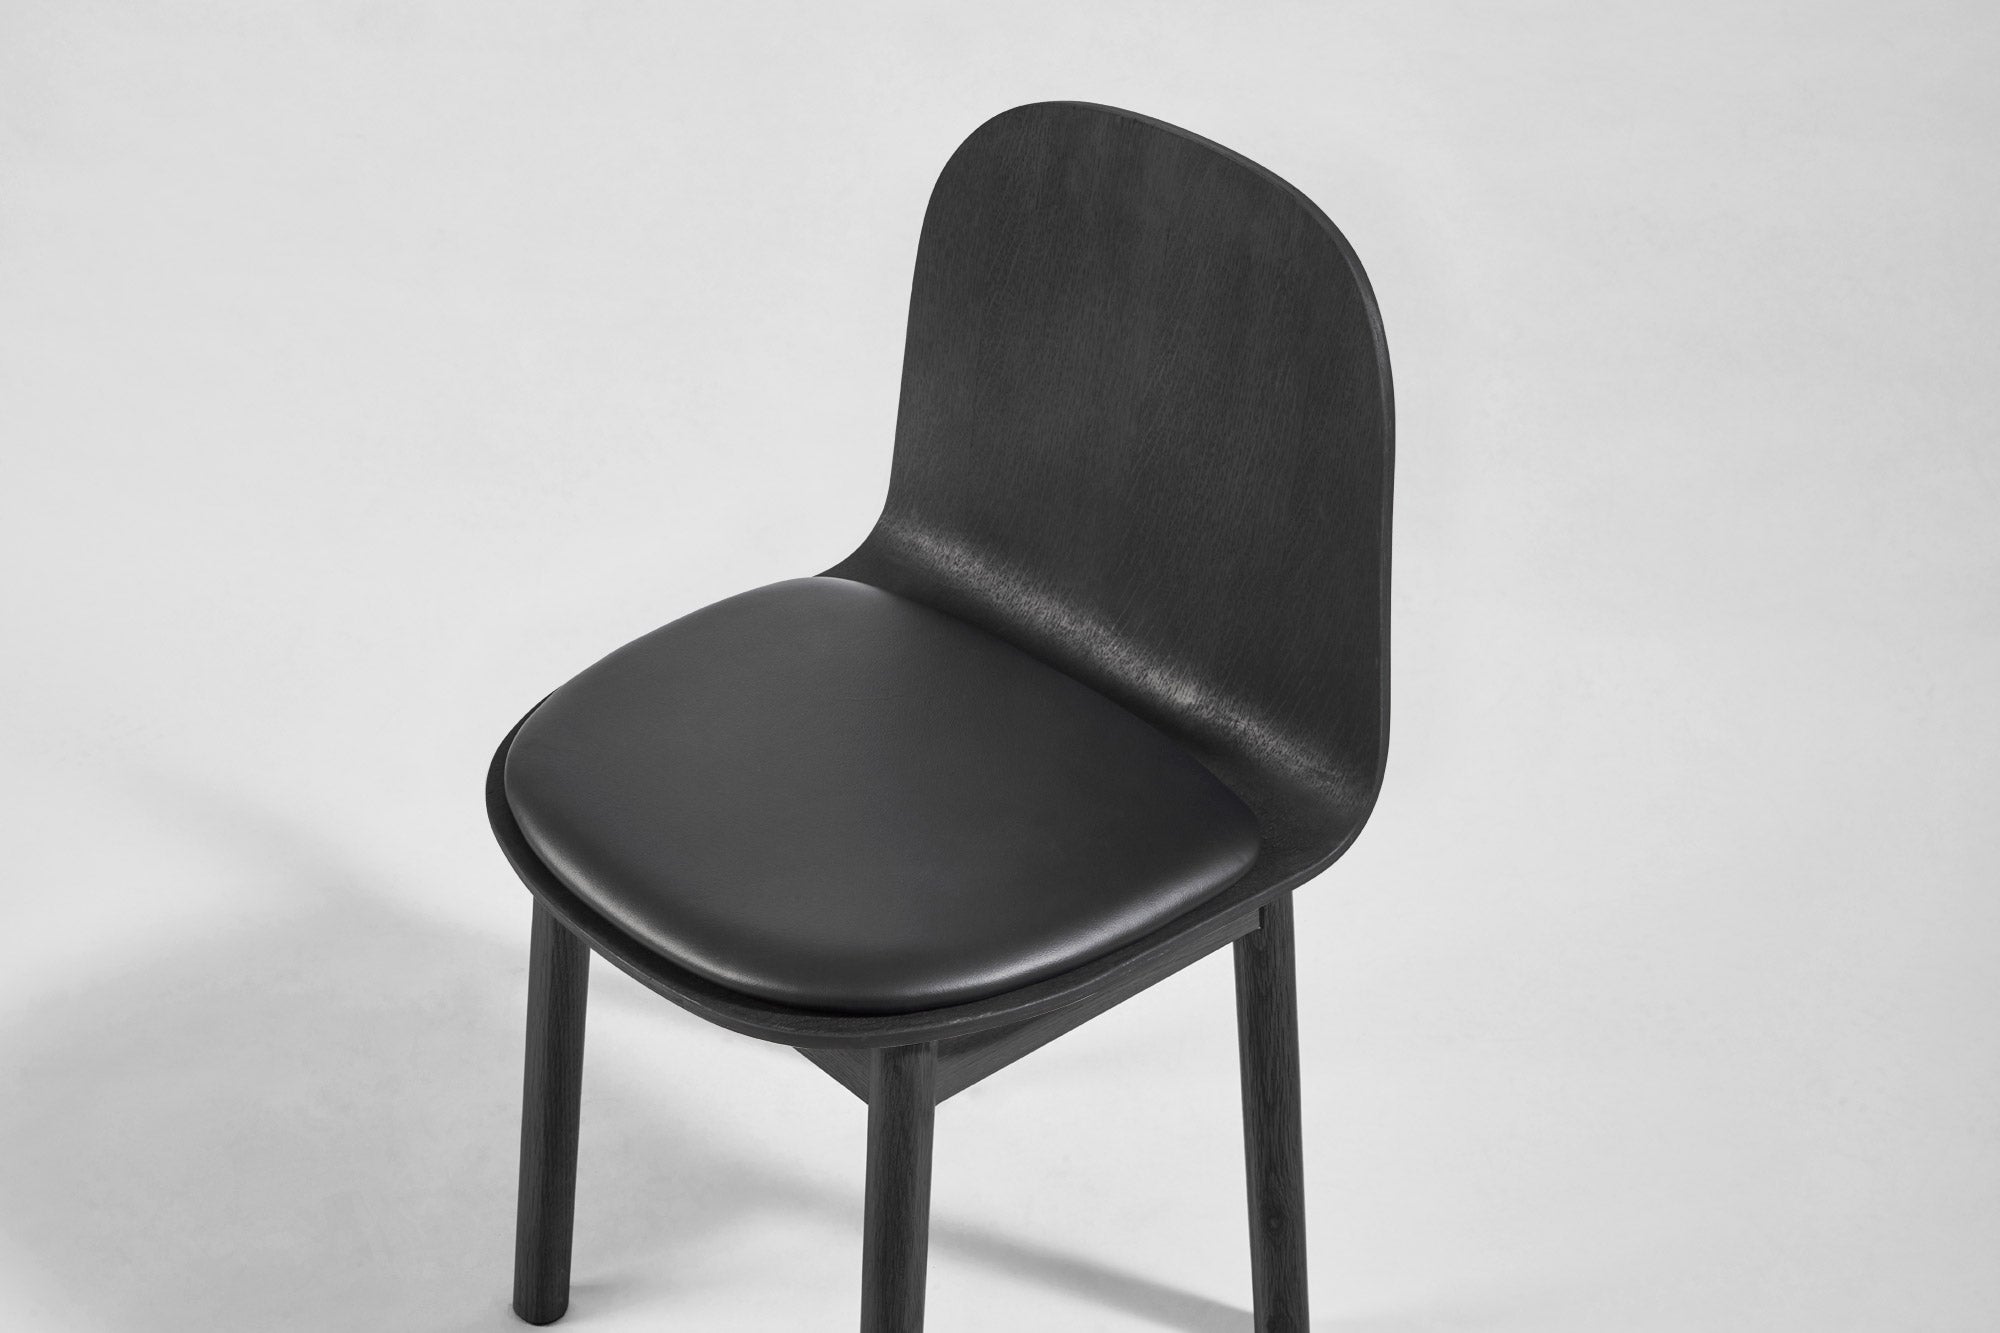 Potato Chair | Timber Dining Office Chair with Handle | GibsonKarlo | DesignByThem ** HL1 Leather Primary - BA90 Black / HF2 Lariat (Vinyl) - 006 Black